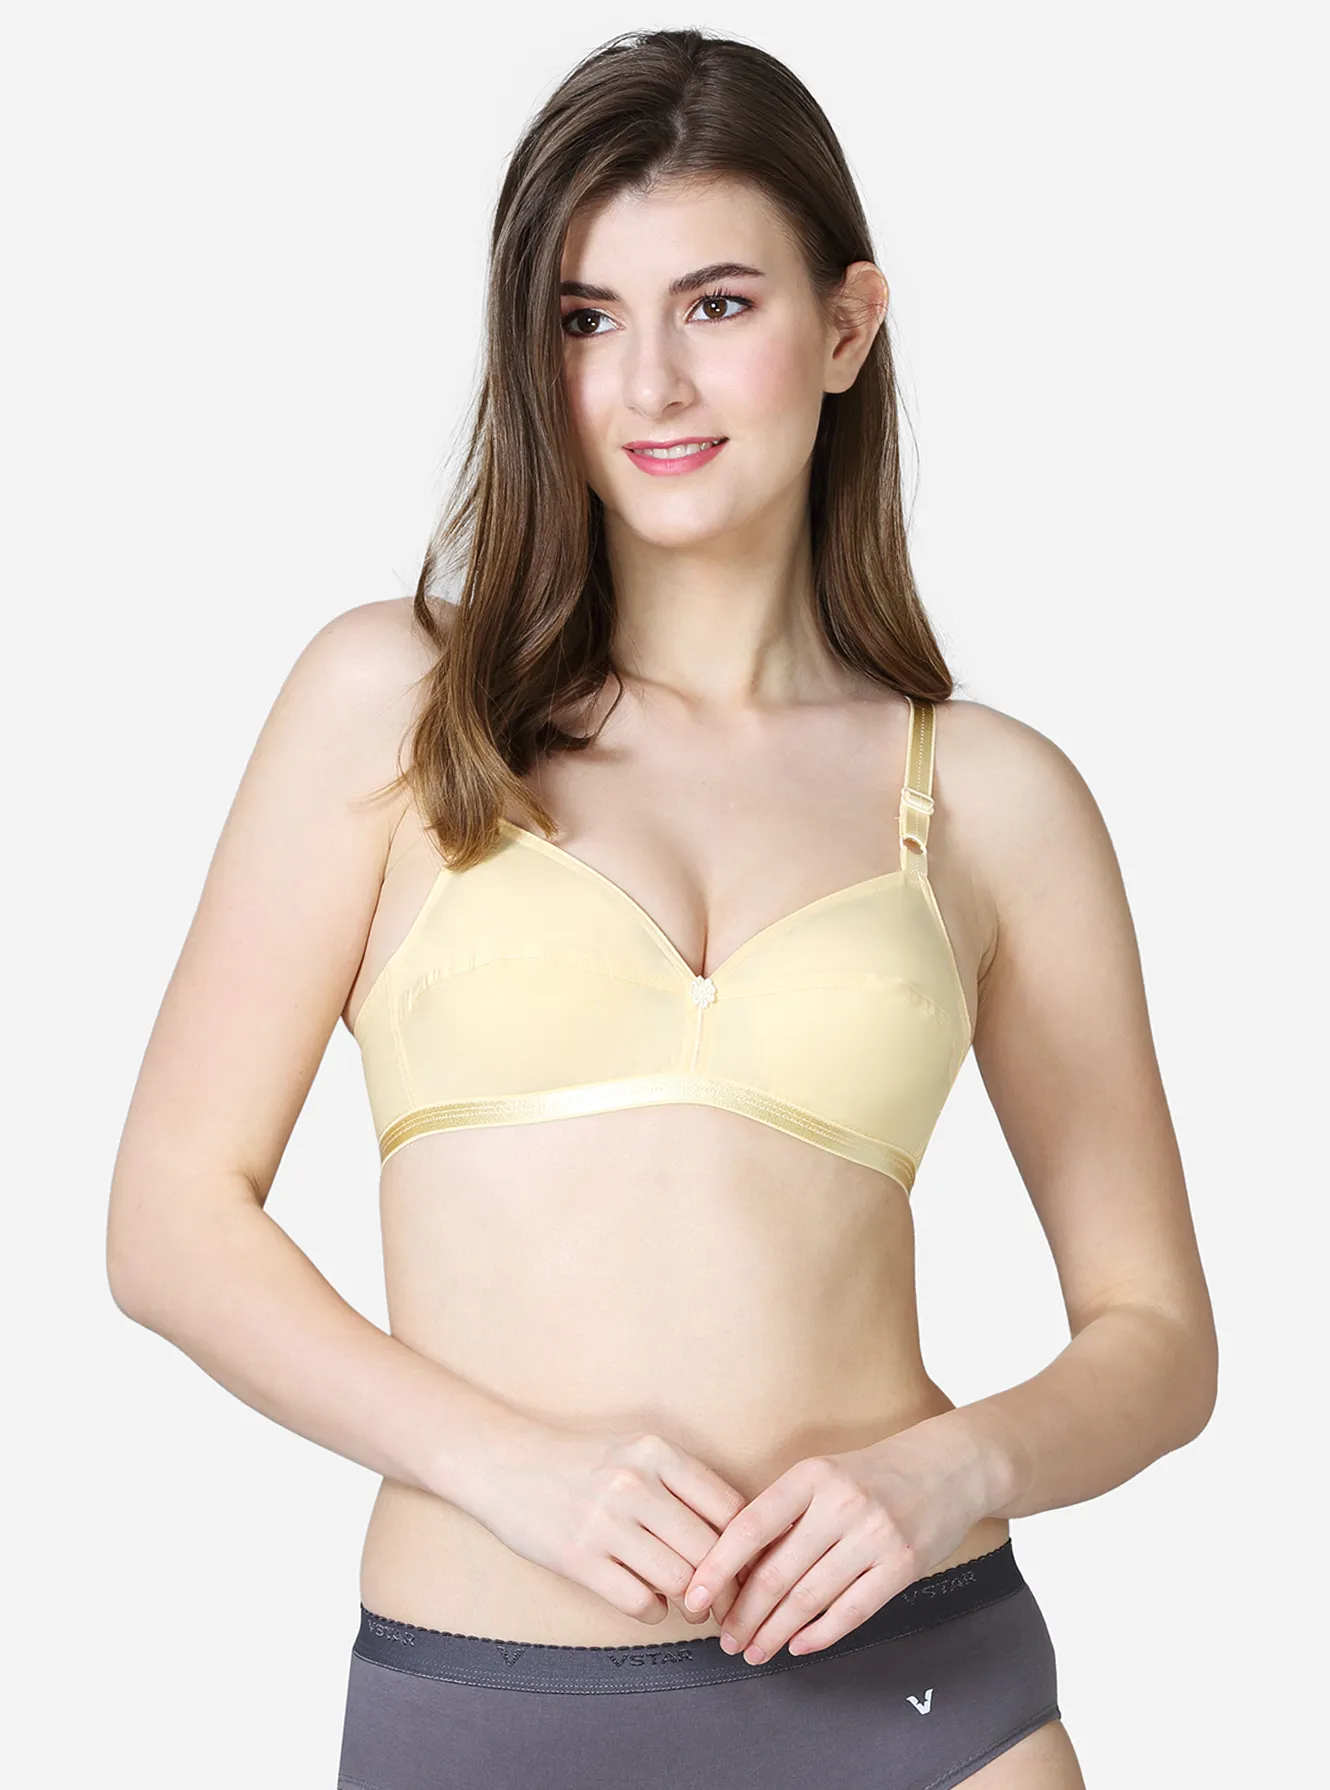 Single layered pointed seamed cup medium coverage bra